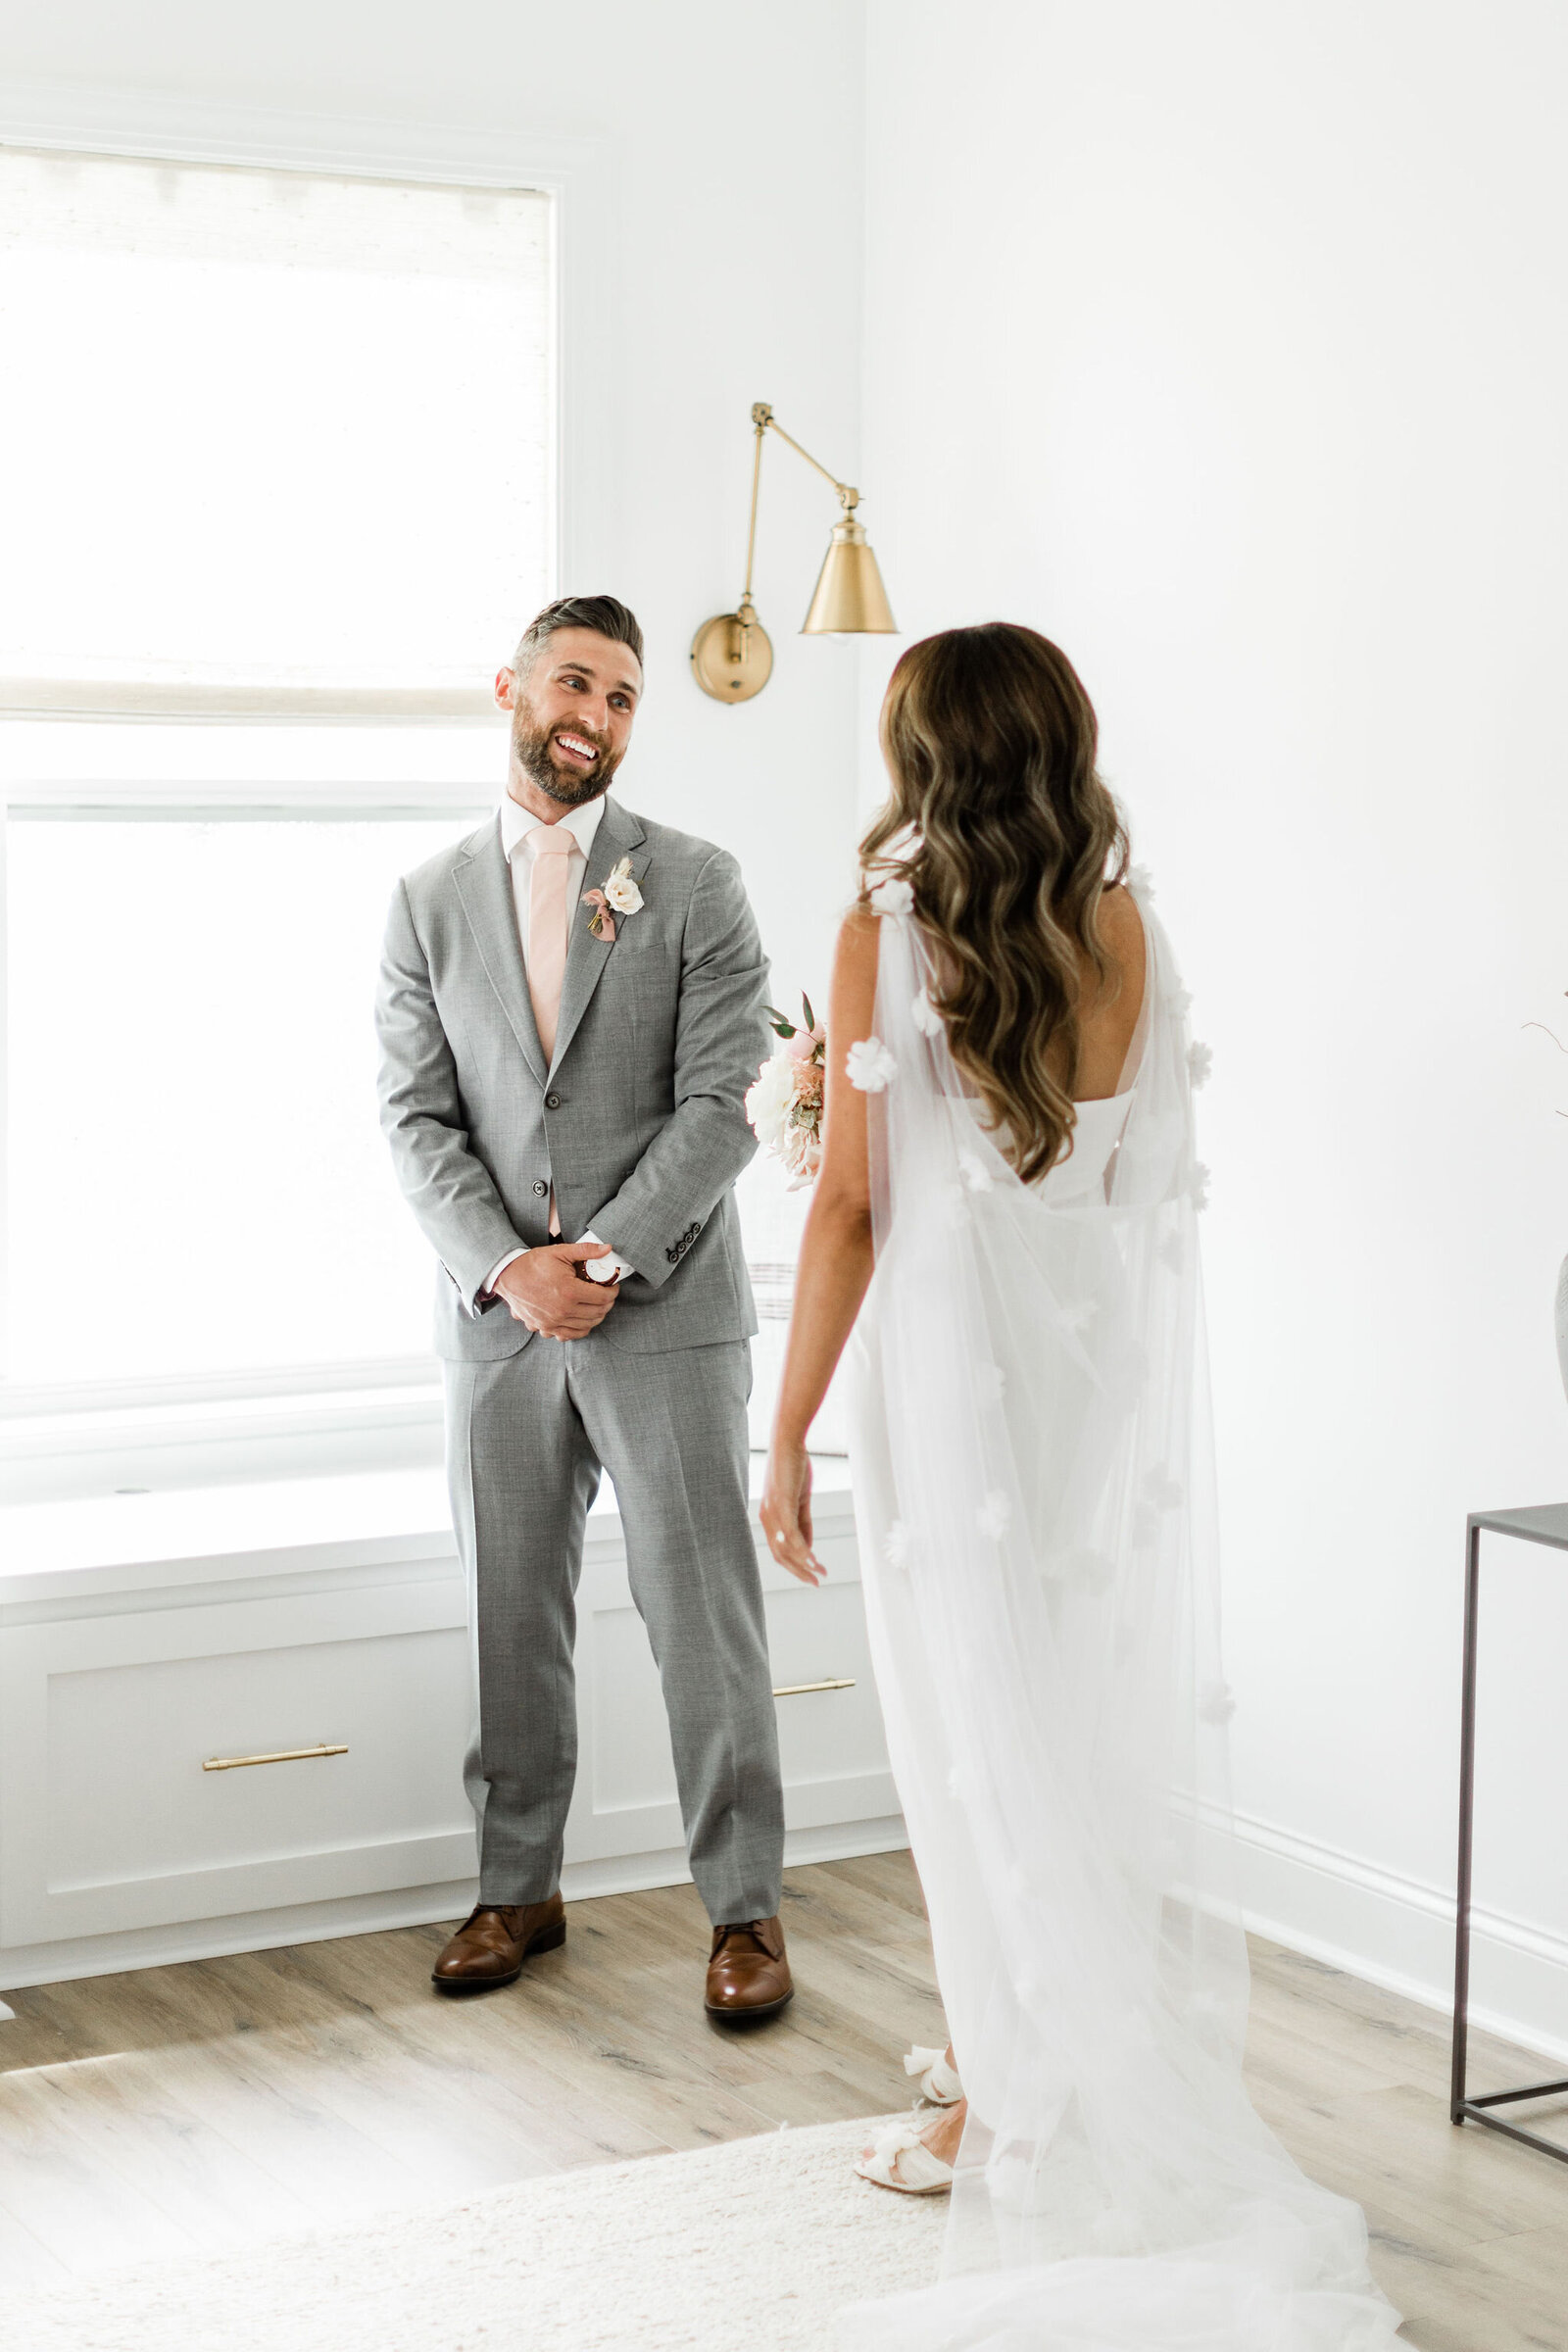 The First Look on their Wedding Day | Raleigh NC | The Axtells Photo and Film